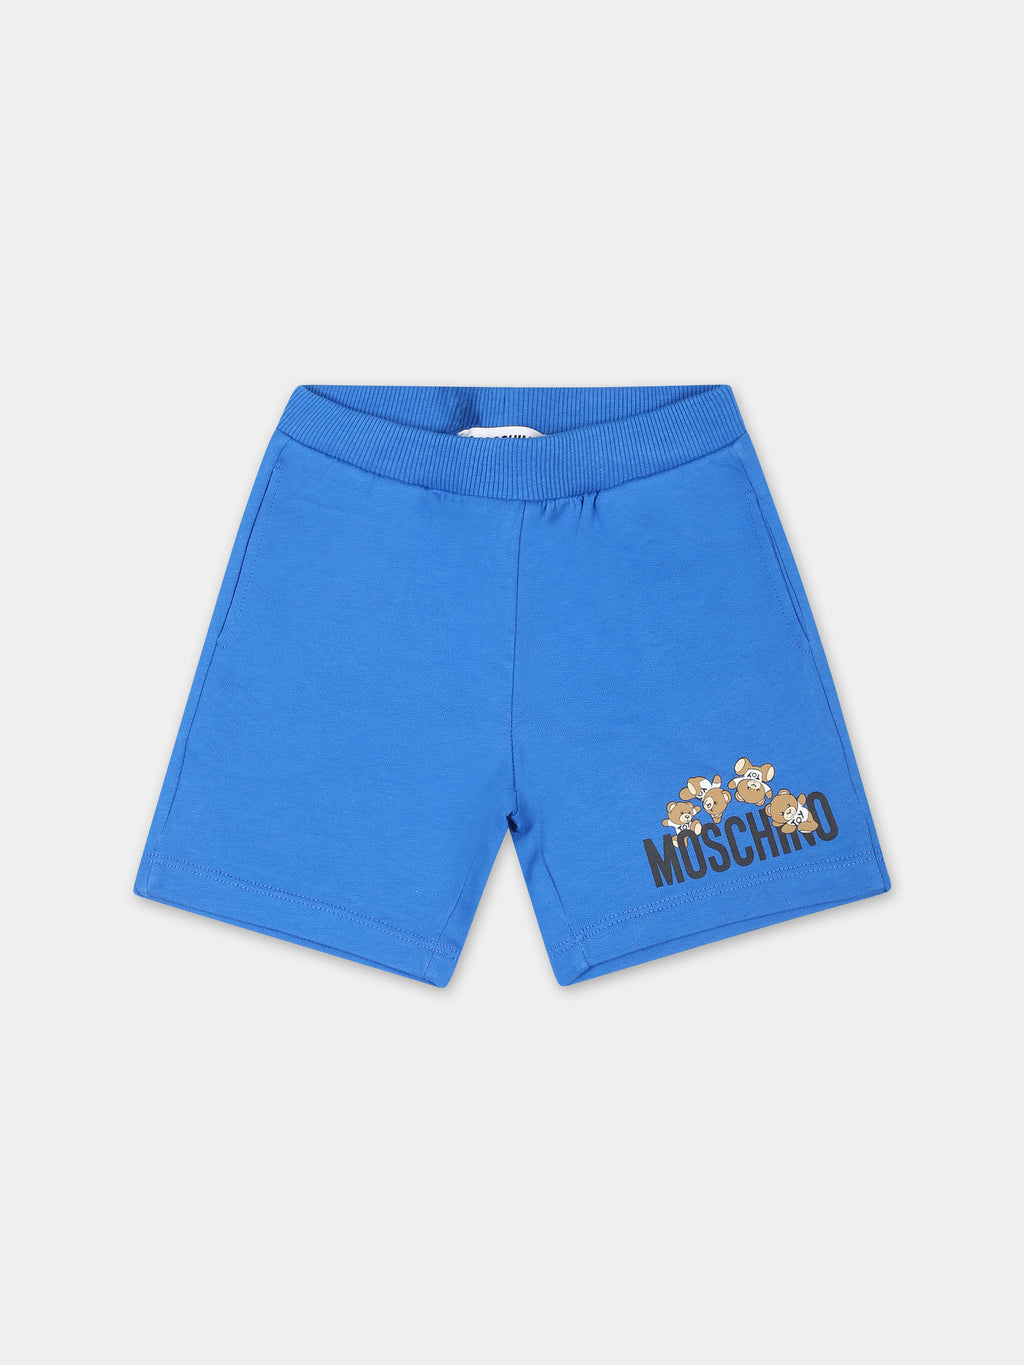 Blue shorts for baby boy with Teddy Bears and logo